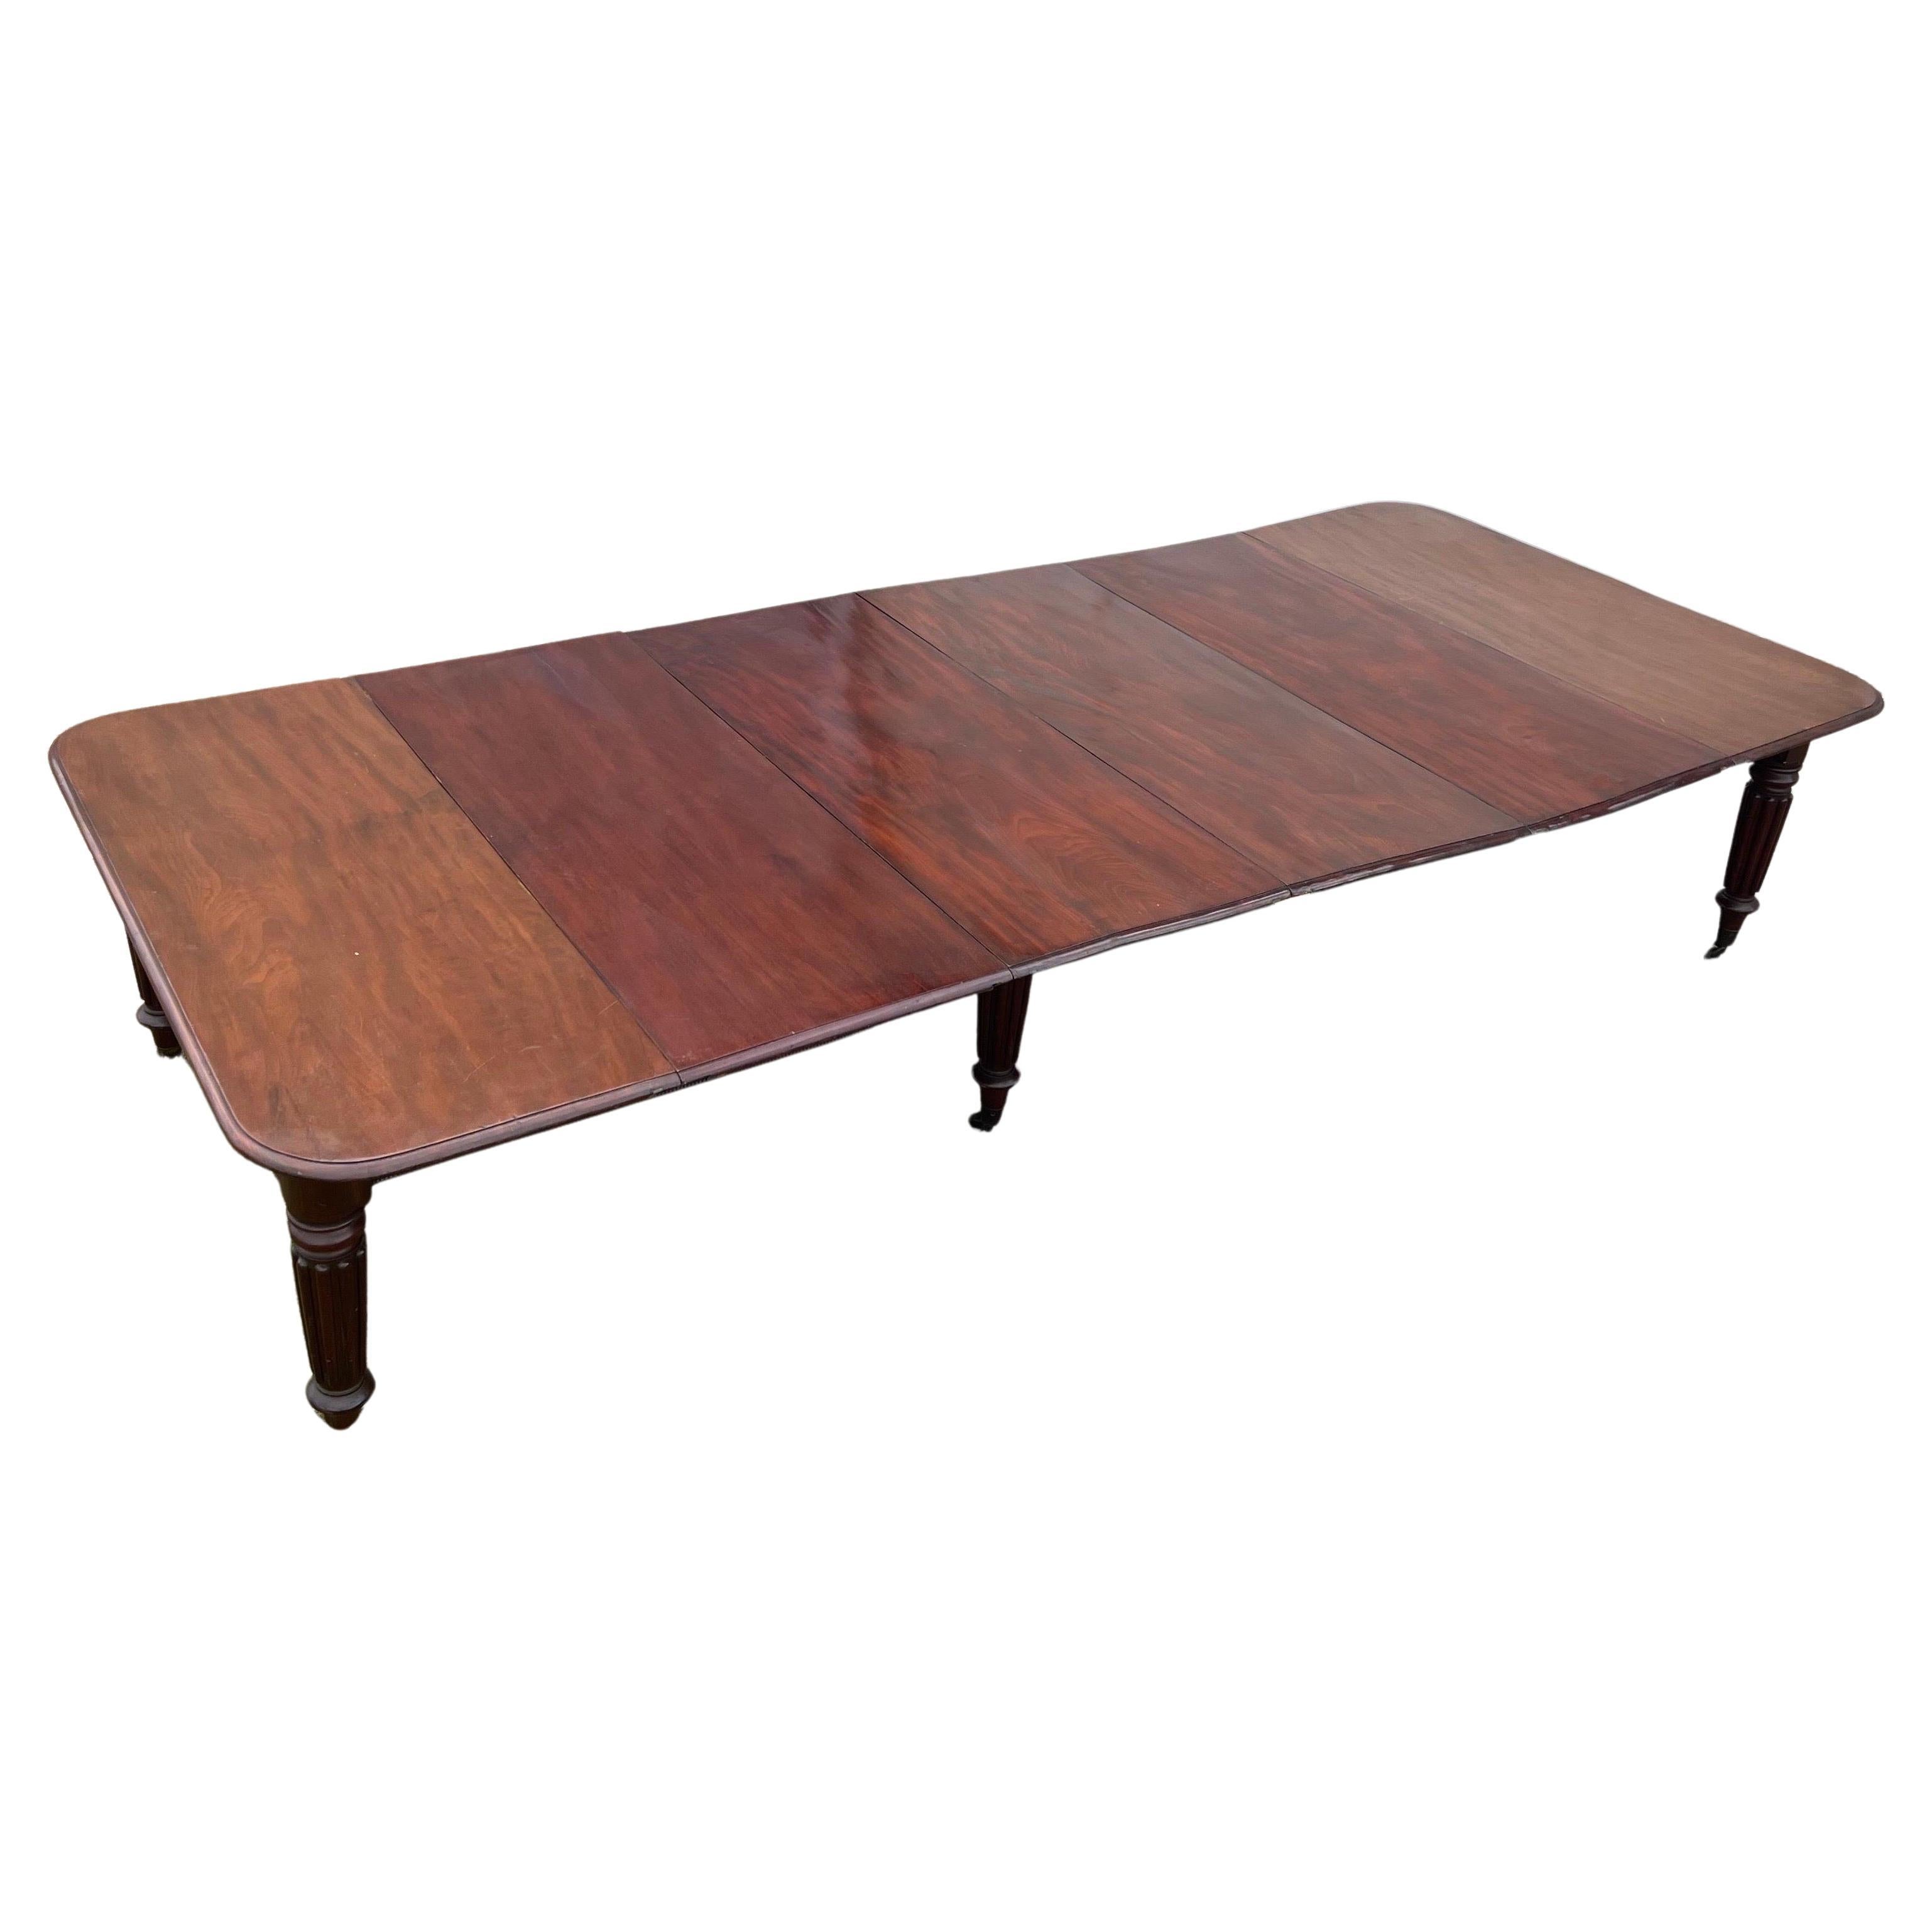 19th Century English Mahogany Dining Table, likely by Gillows For Sale